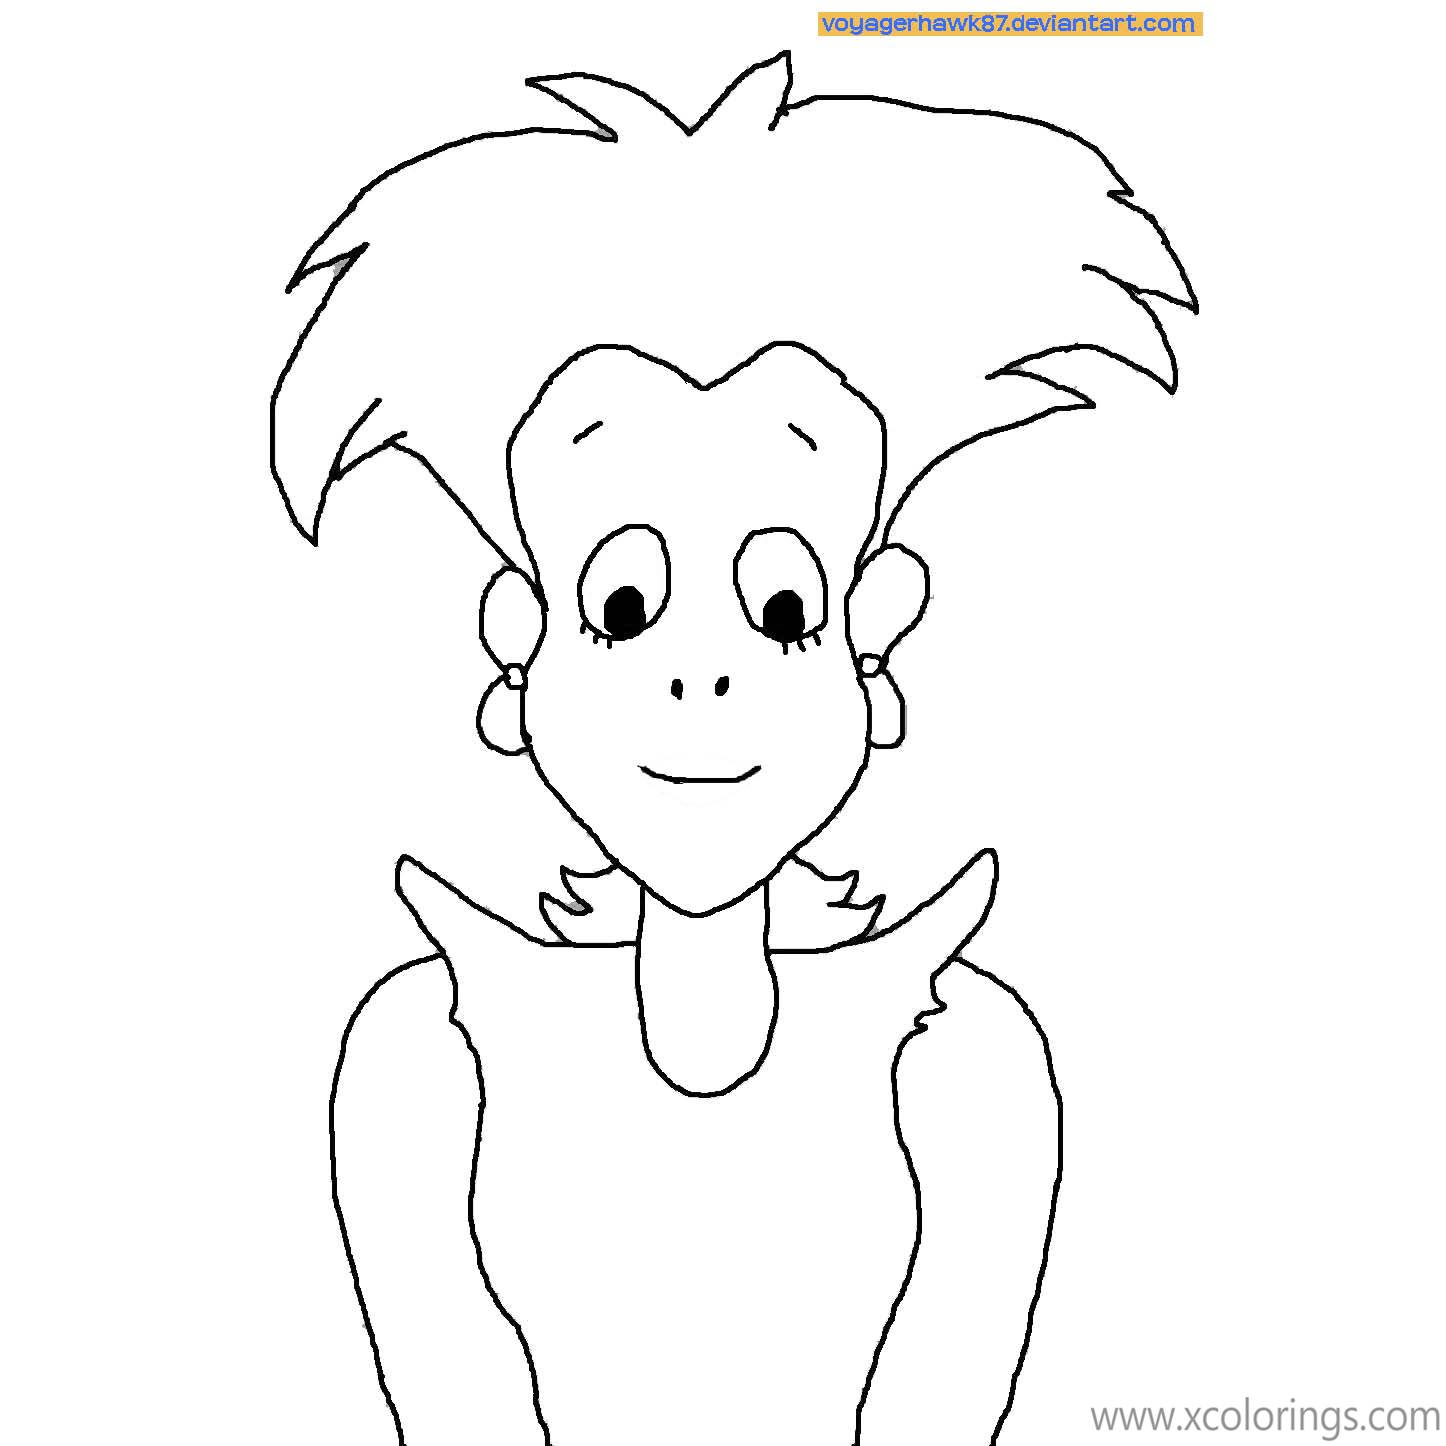 Bobby's World Coloring Pages Kelly Generic by VoyagerHawk87